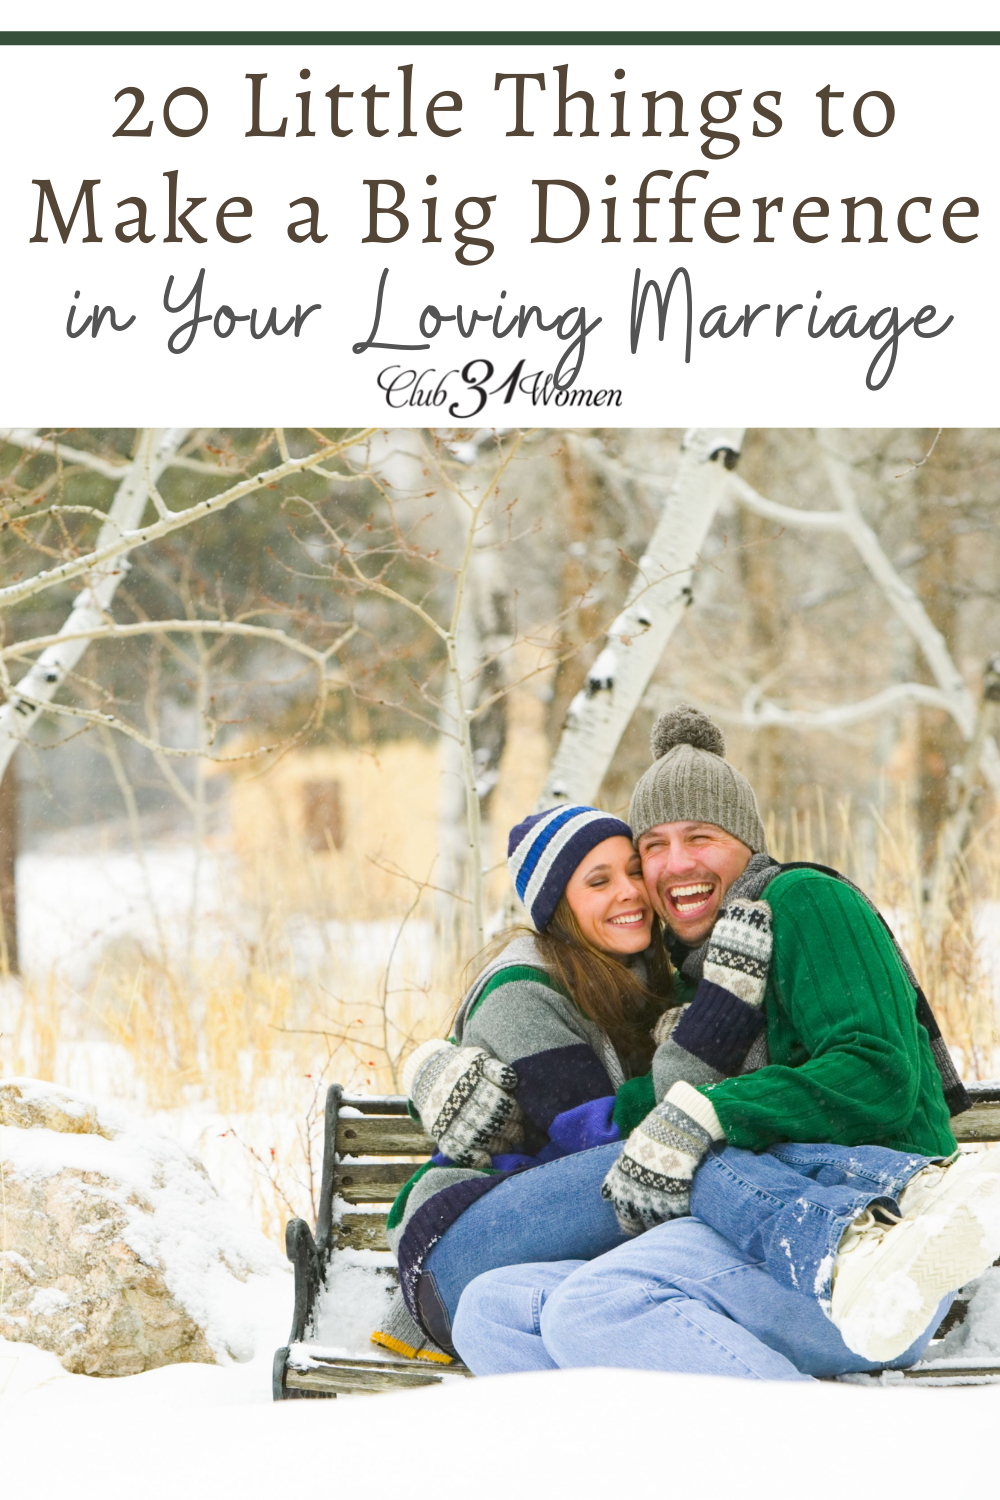 What goes into a joyful and loving marriage? So much is made up of these small things. So beloved bride -whether newly married or not- here's a gift for you! ~ Club31Women via @Club31Women